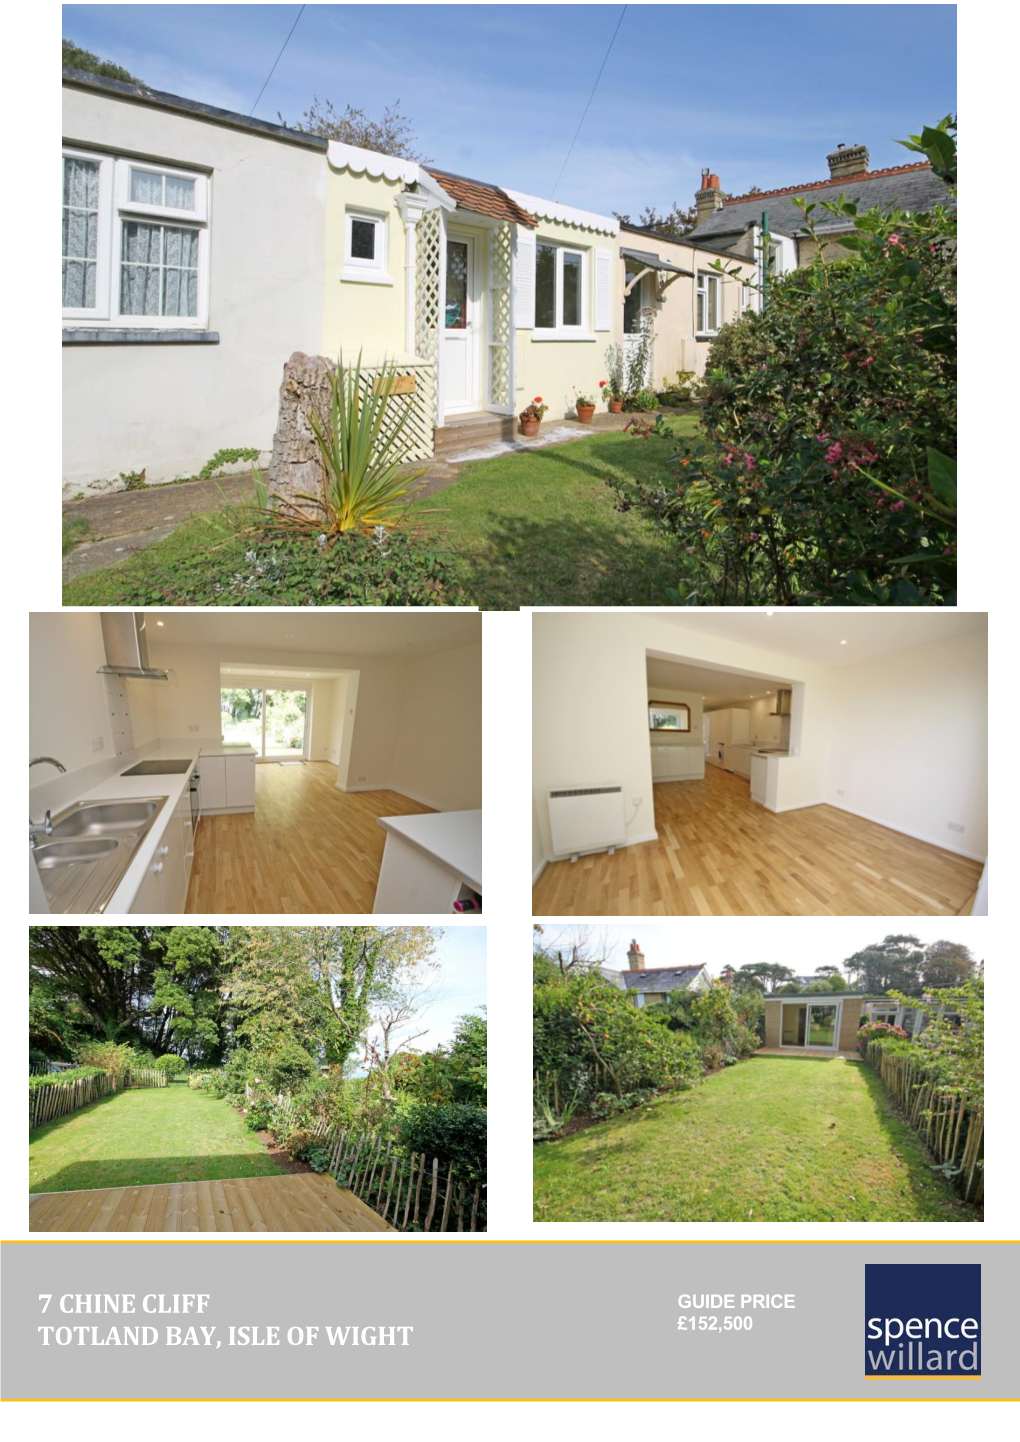 7 Chine Cliff Totland Bay, Isle of Wight £152,500